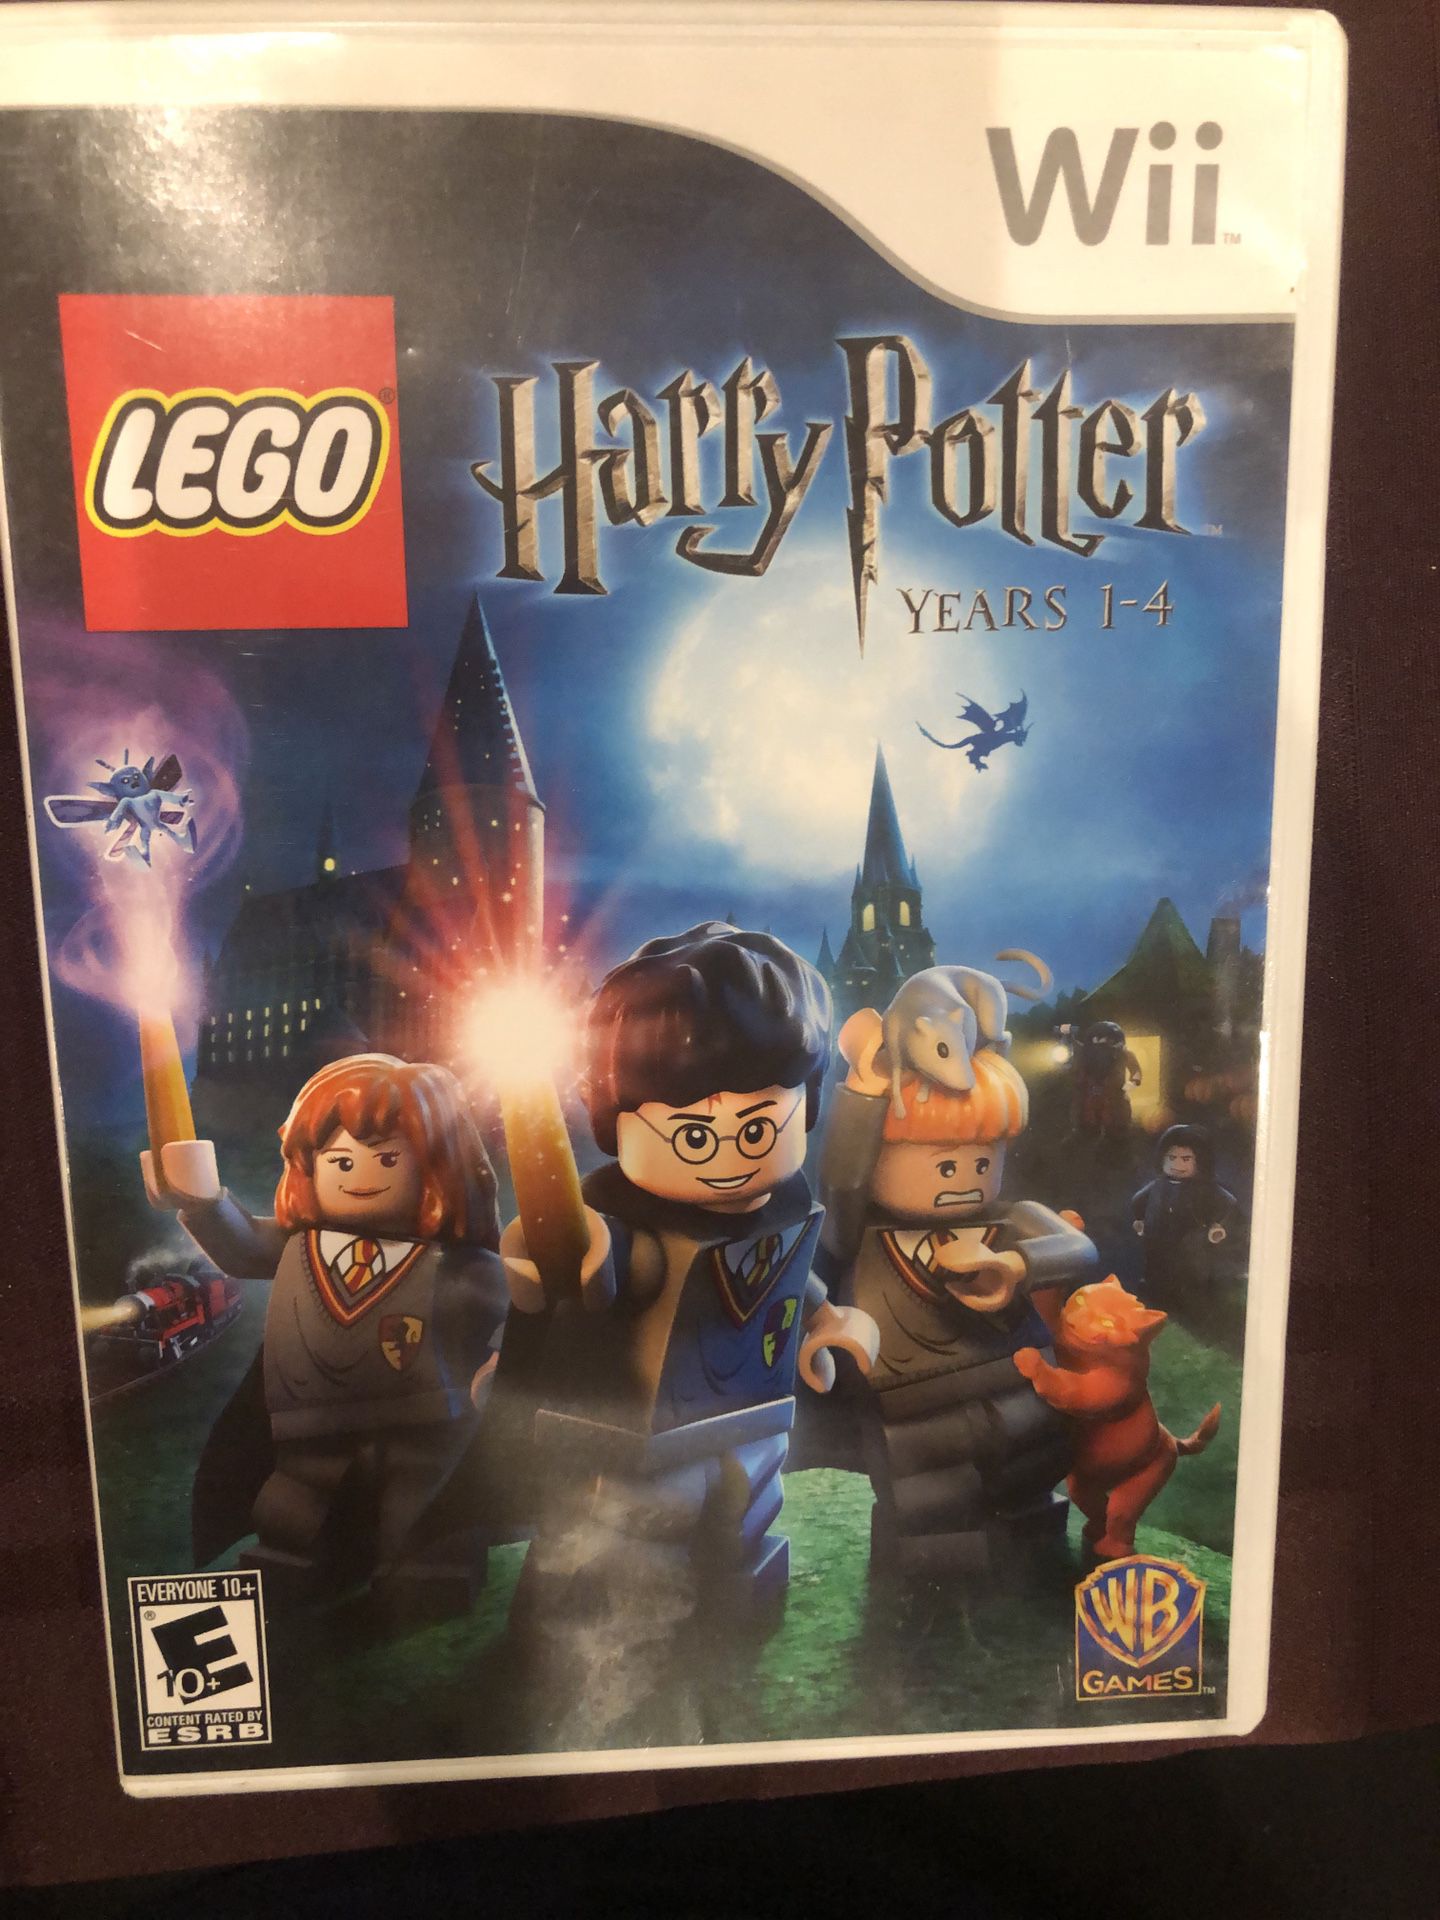 Wii Harry Potter LEGO